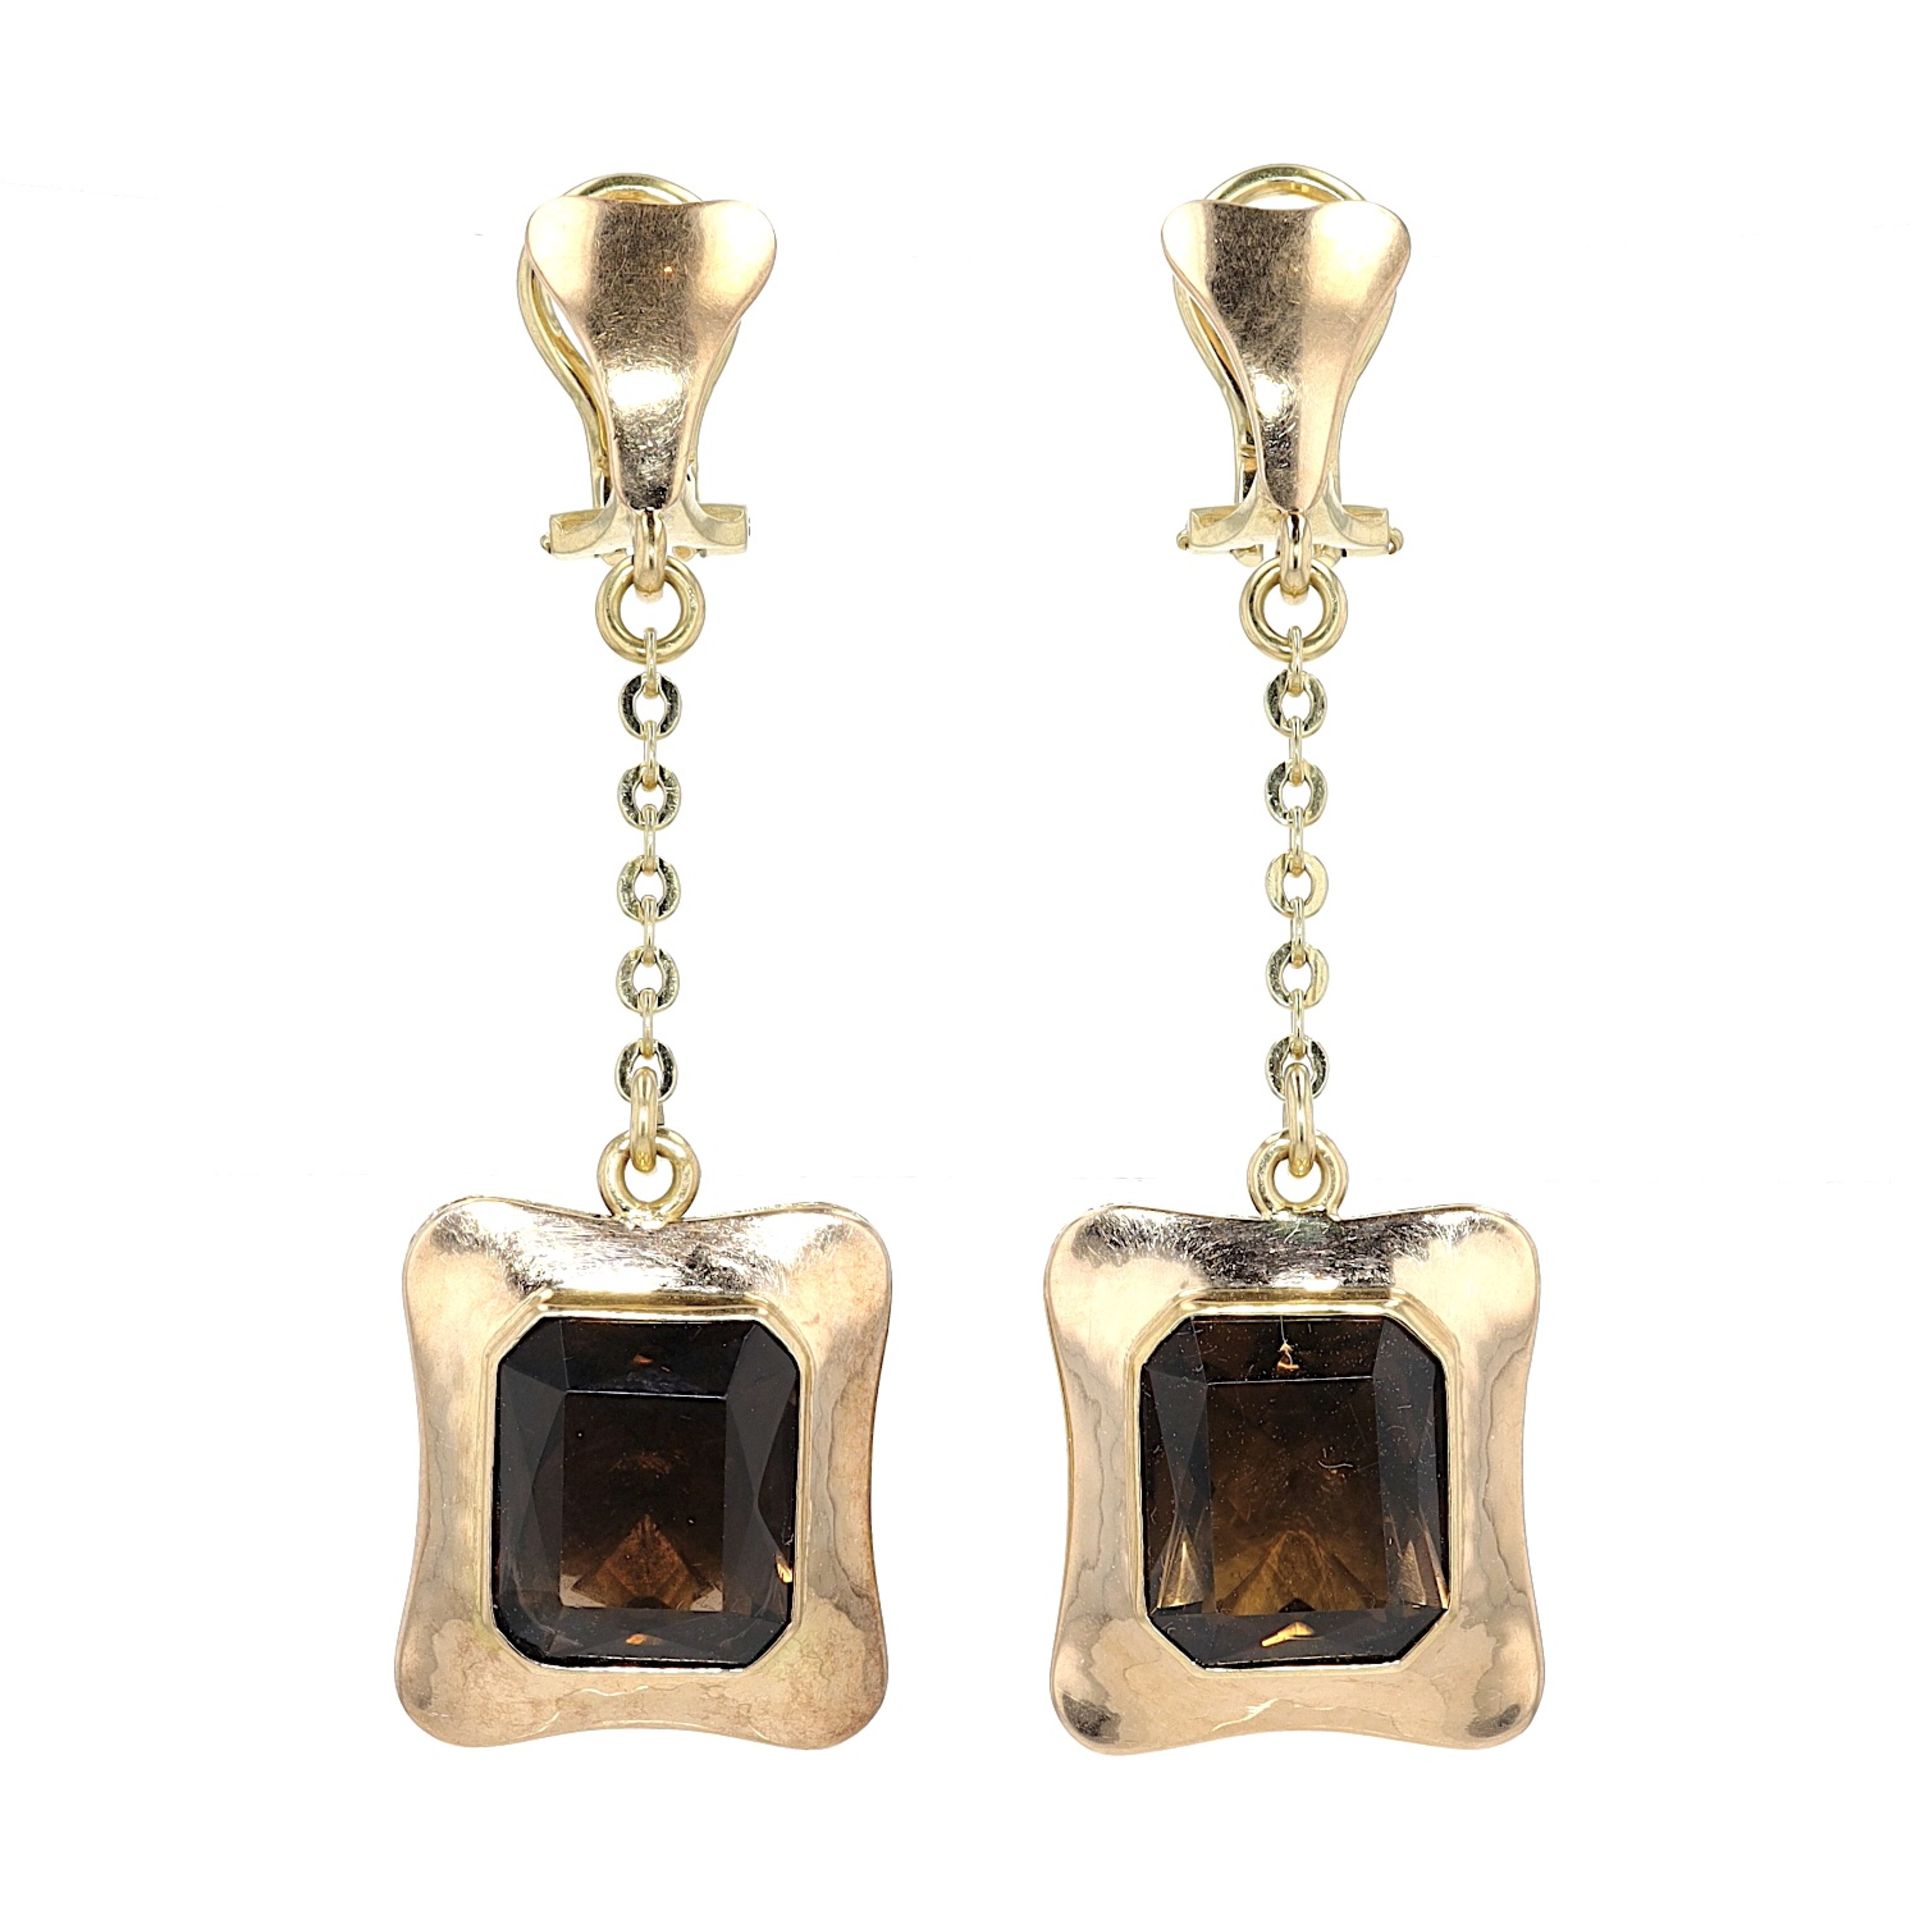 1 pair of 585 gold earrings with smoky quartz